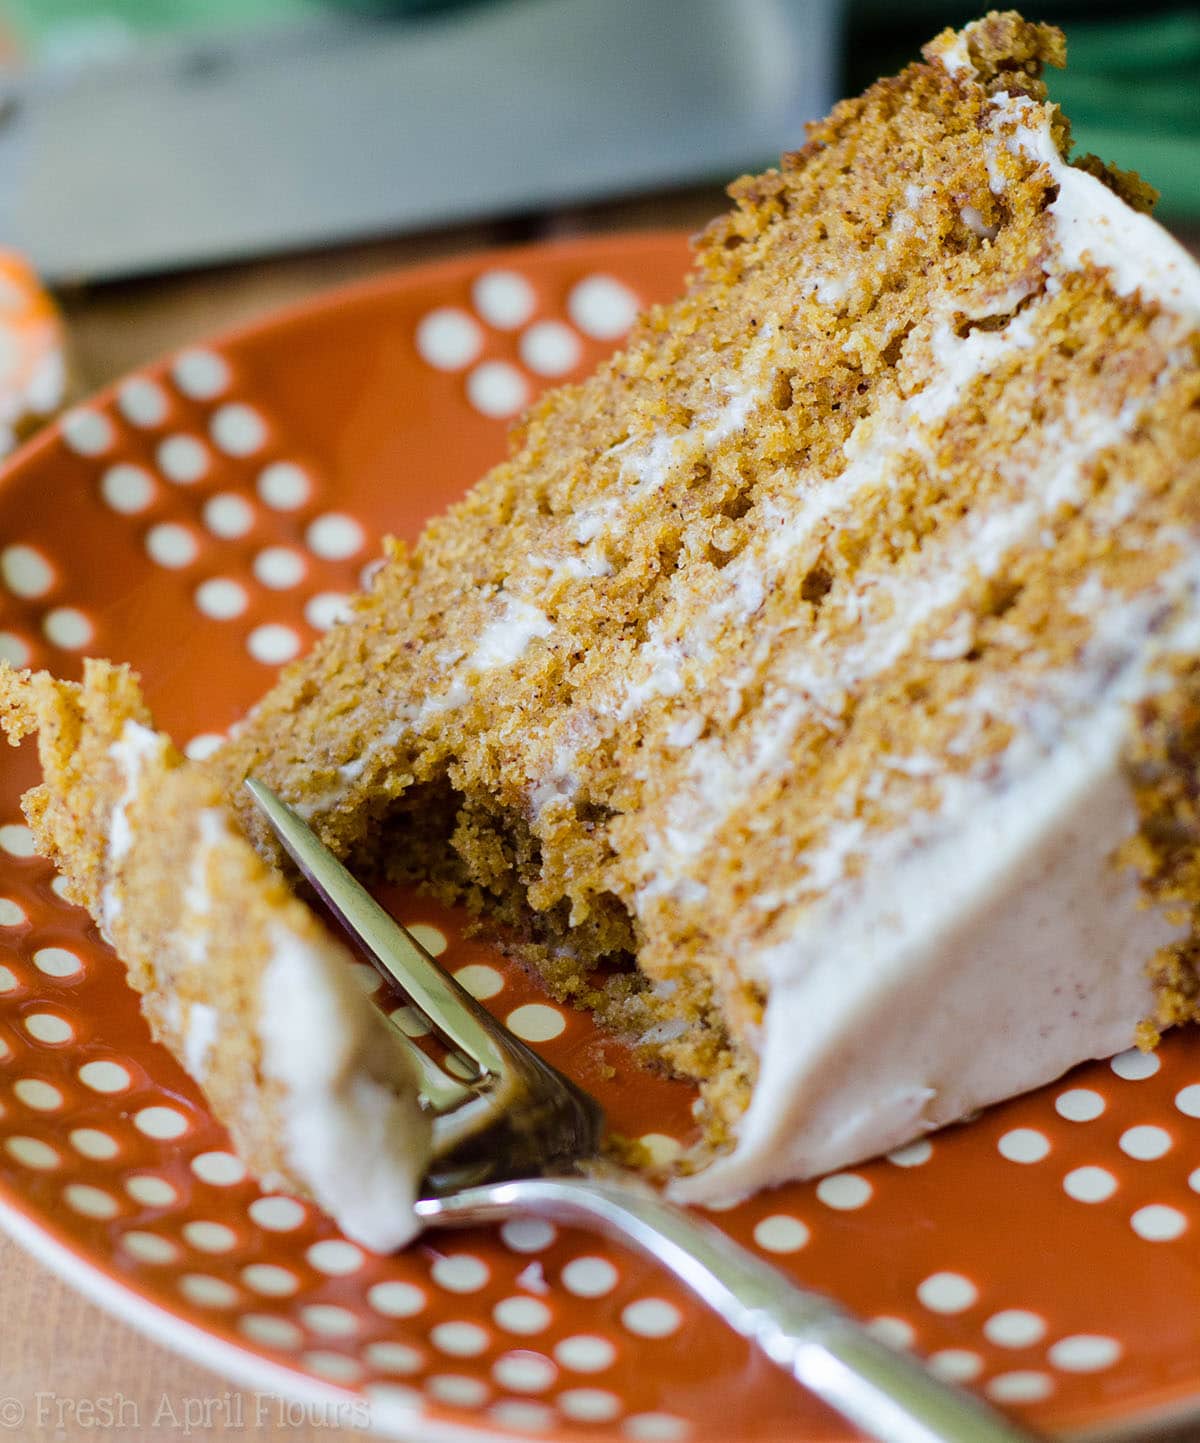 Brown Butter Pumpkin Cake with Maple Cinnamon Cream Cheese Frosting: A moist, spiced cake made with real pumpkin and smothered in a creamy, fall flavor-infused cream cheese frosting.